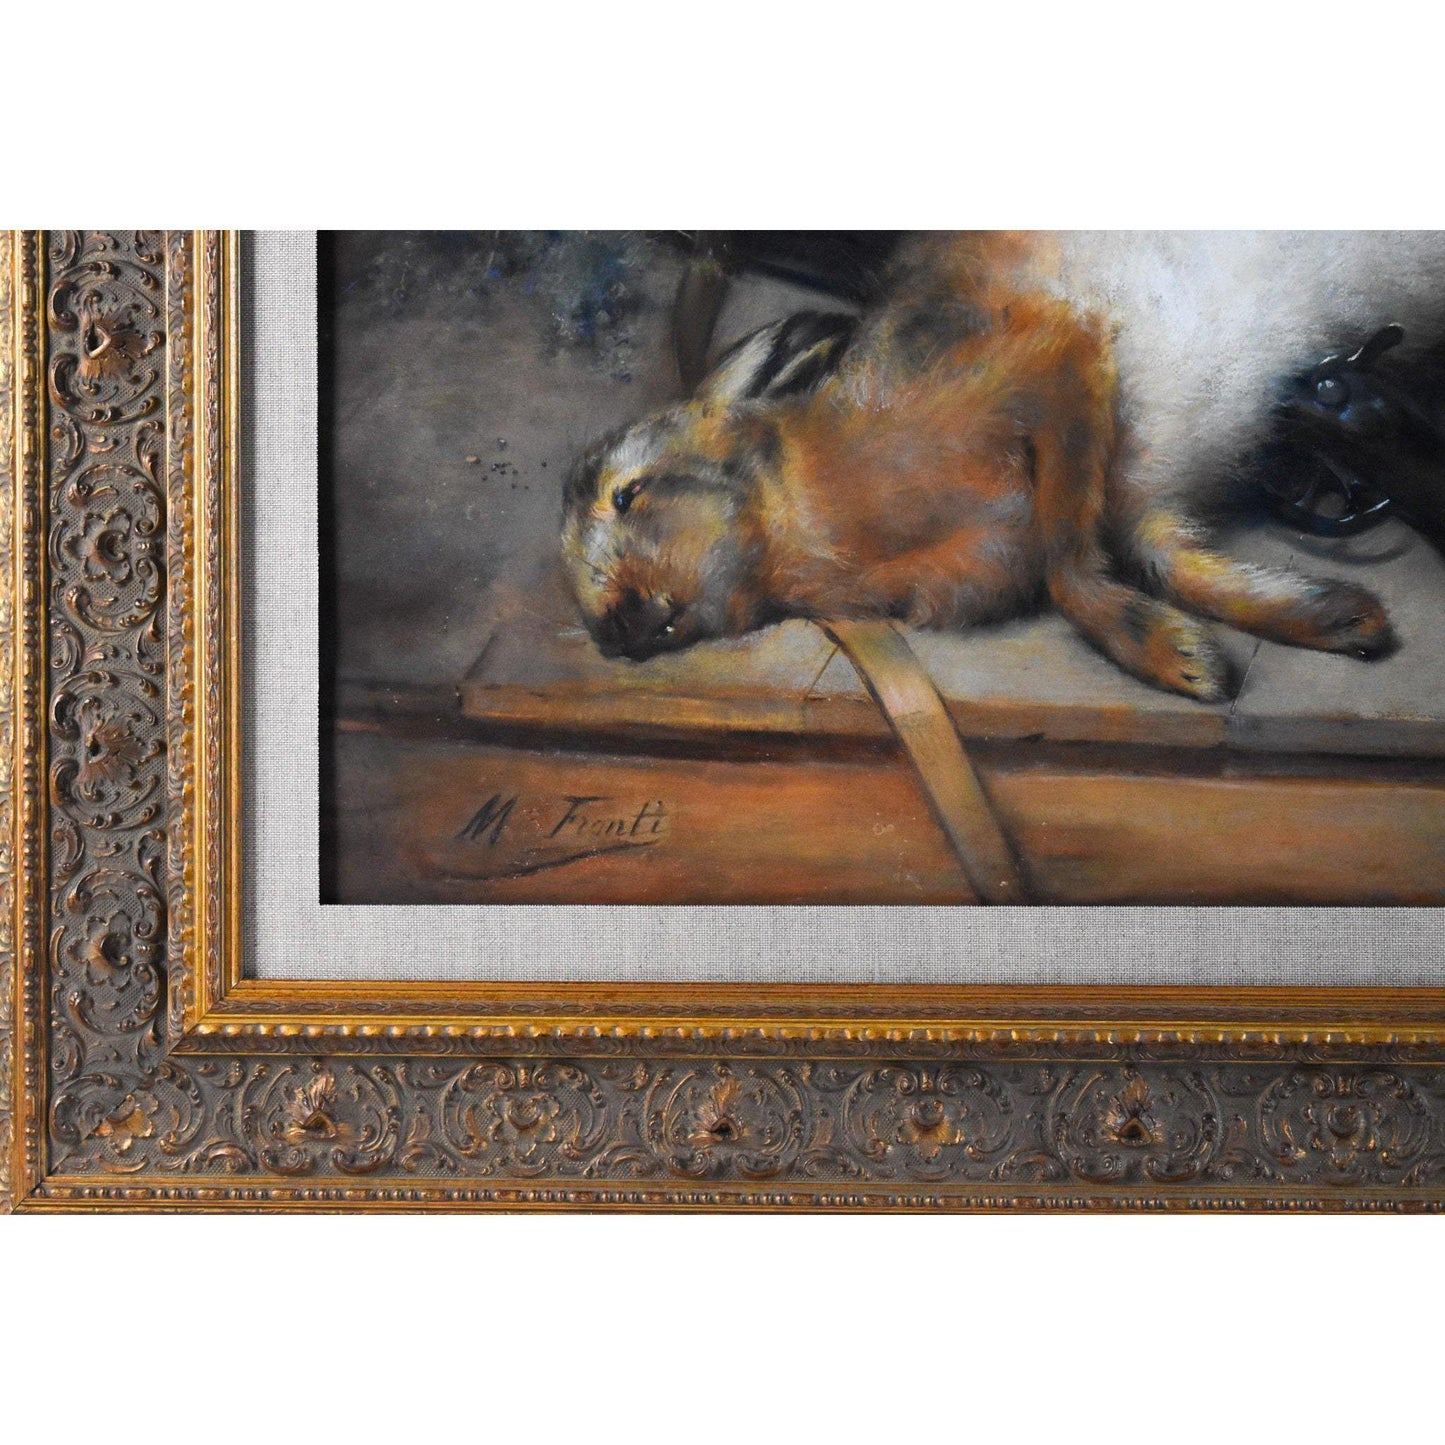 Antique still life painting pastel hare circa 1900 by Michel Fronti for sale at Winckelmann Gallery